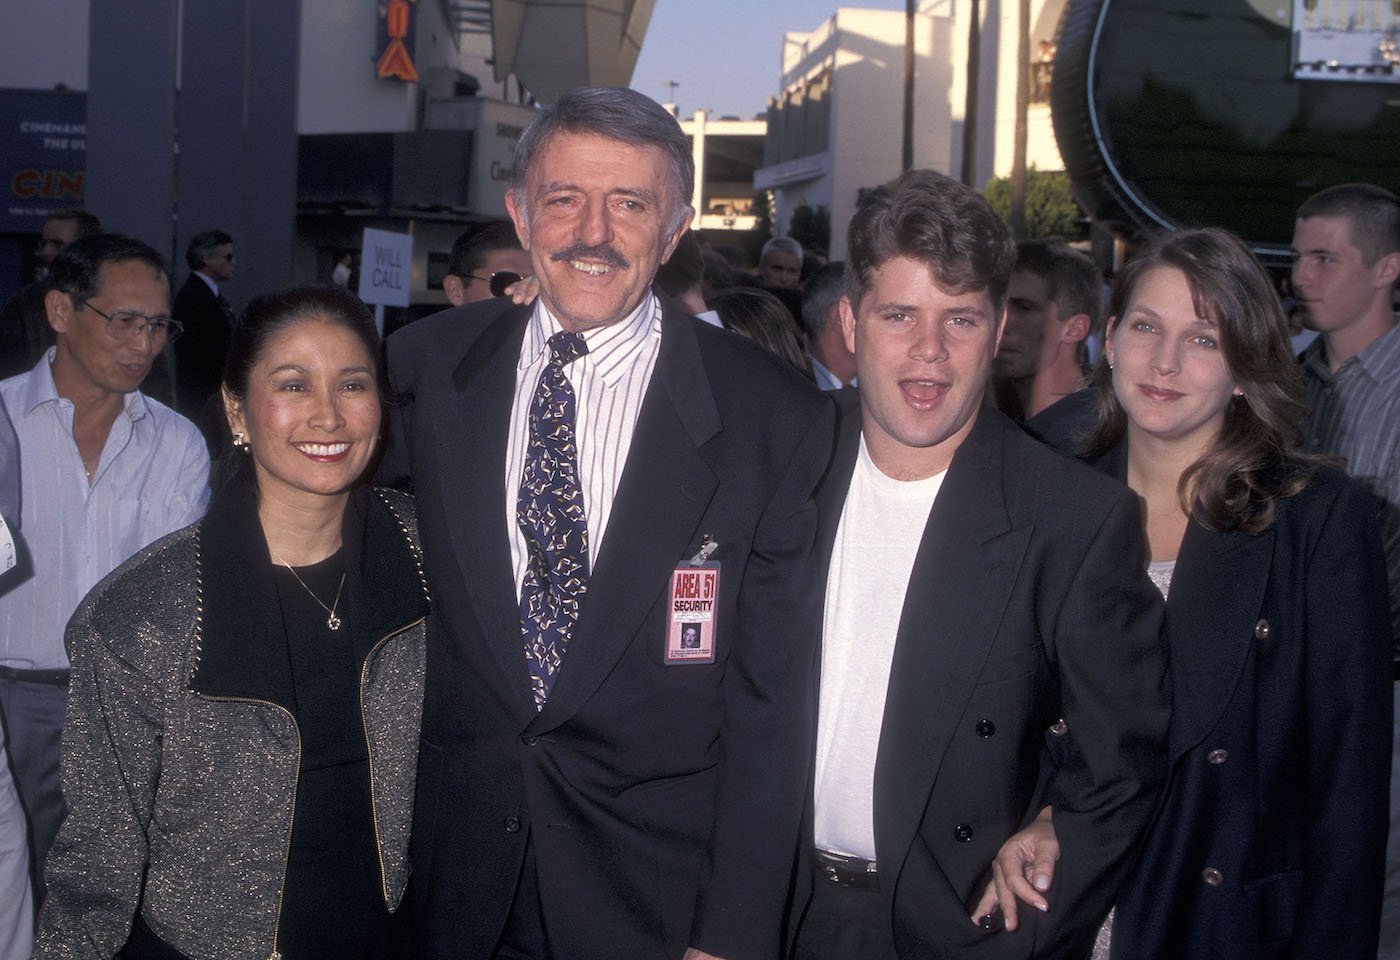 Actor John Astin, wife Valerie, son Sean Astin, and daughter-in-law Christine attend 'The Frighteners' in July 1996 at the Cineplex Odeon Universal City Cinemas in Universal City, California